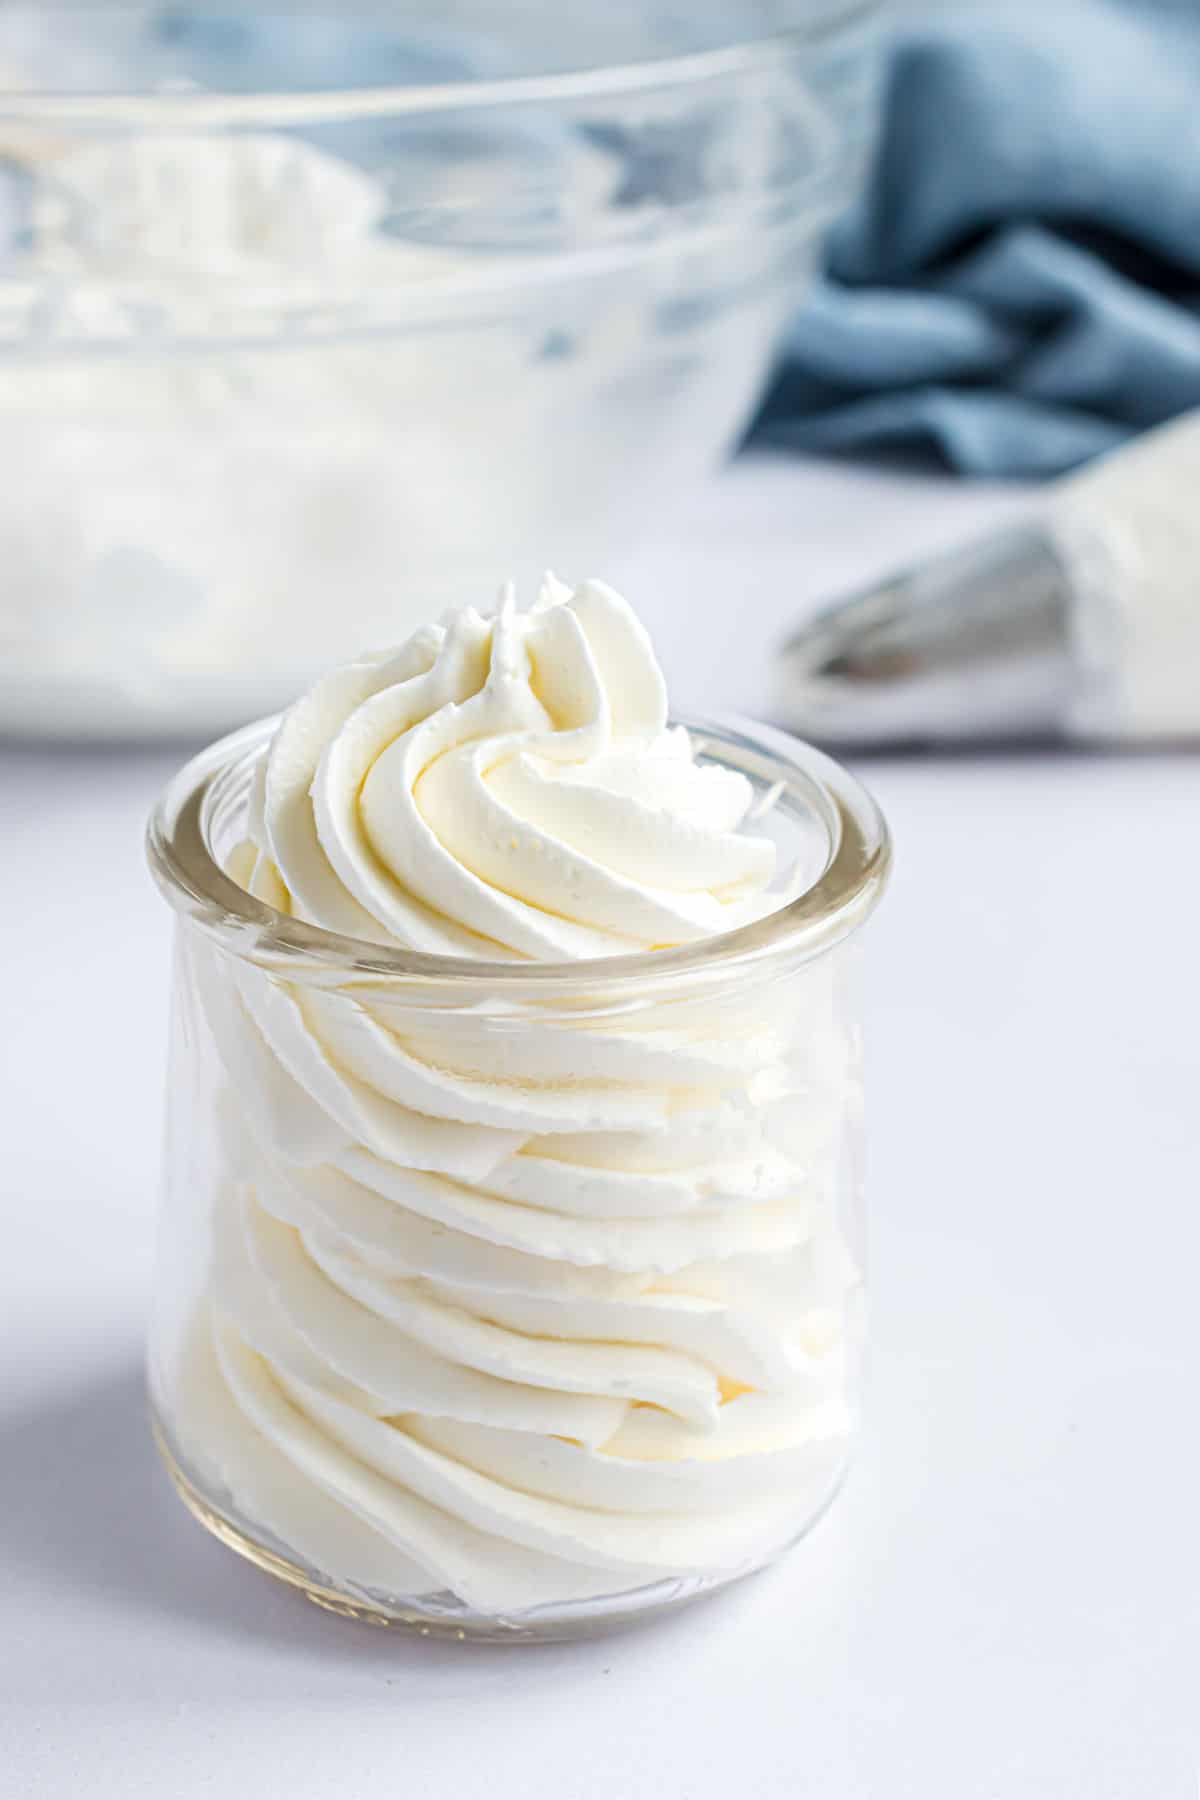 Stabilized whipped cream piped into a small jar.